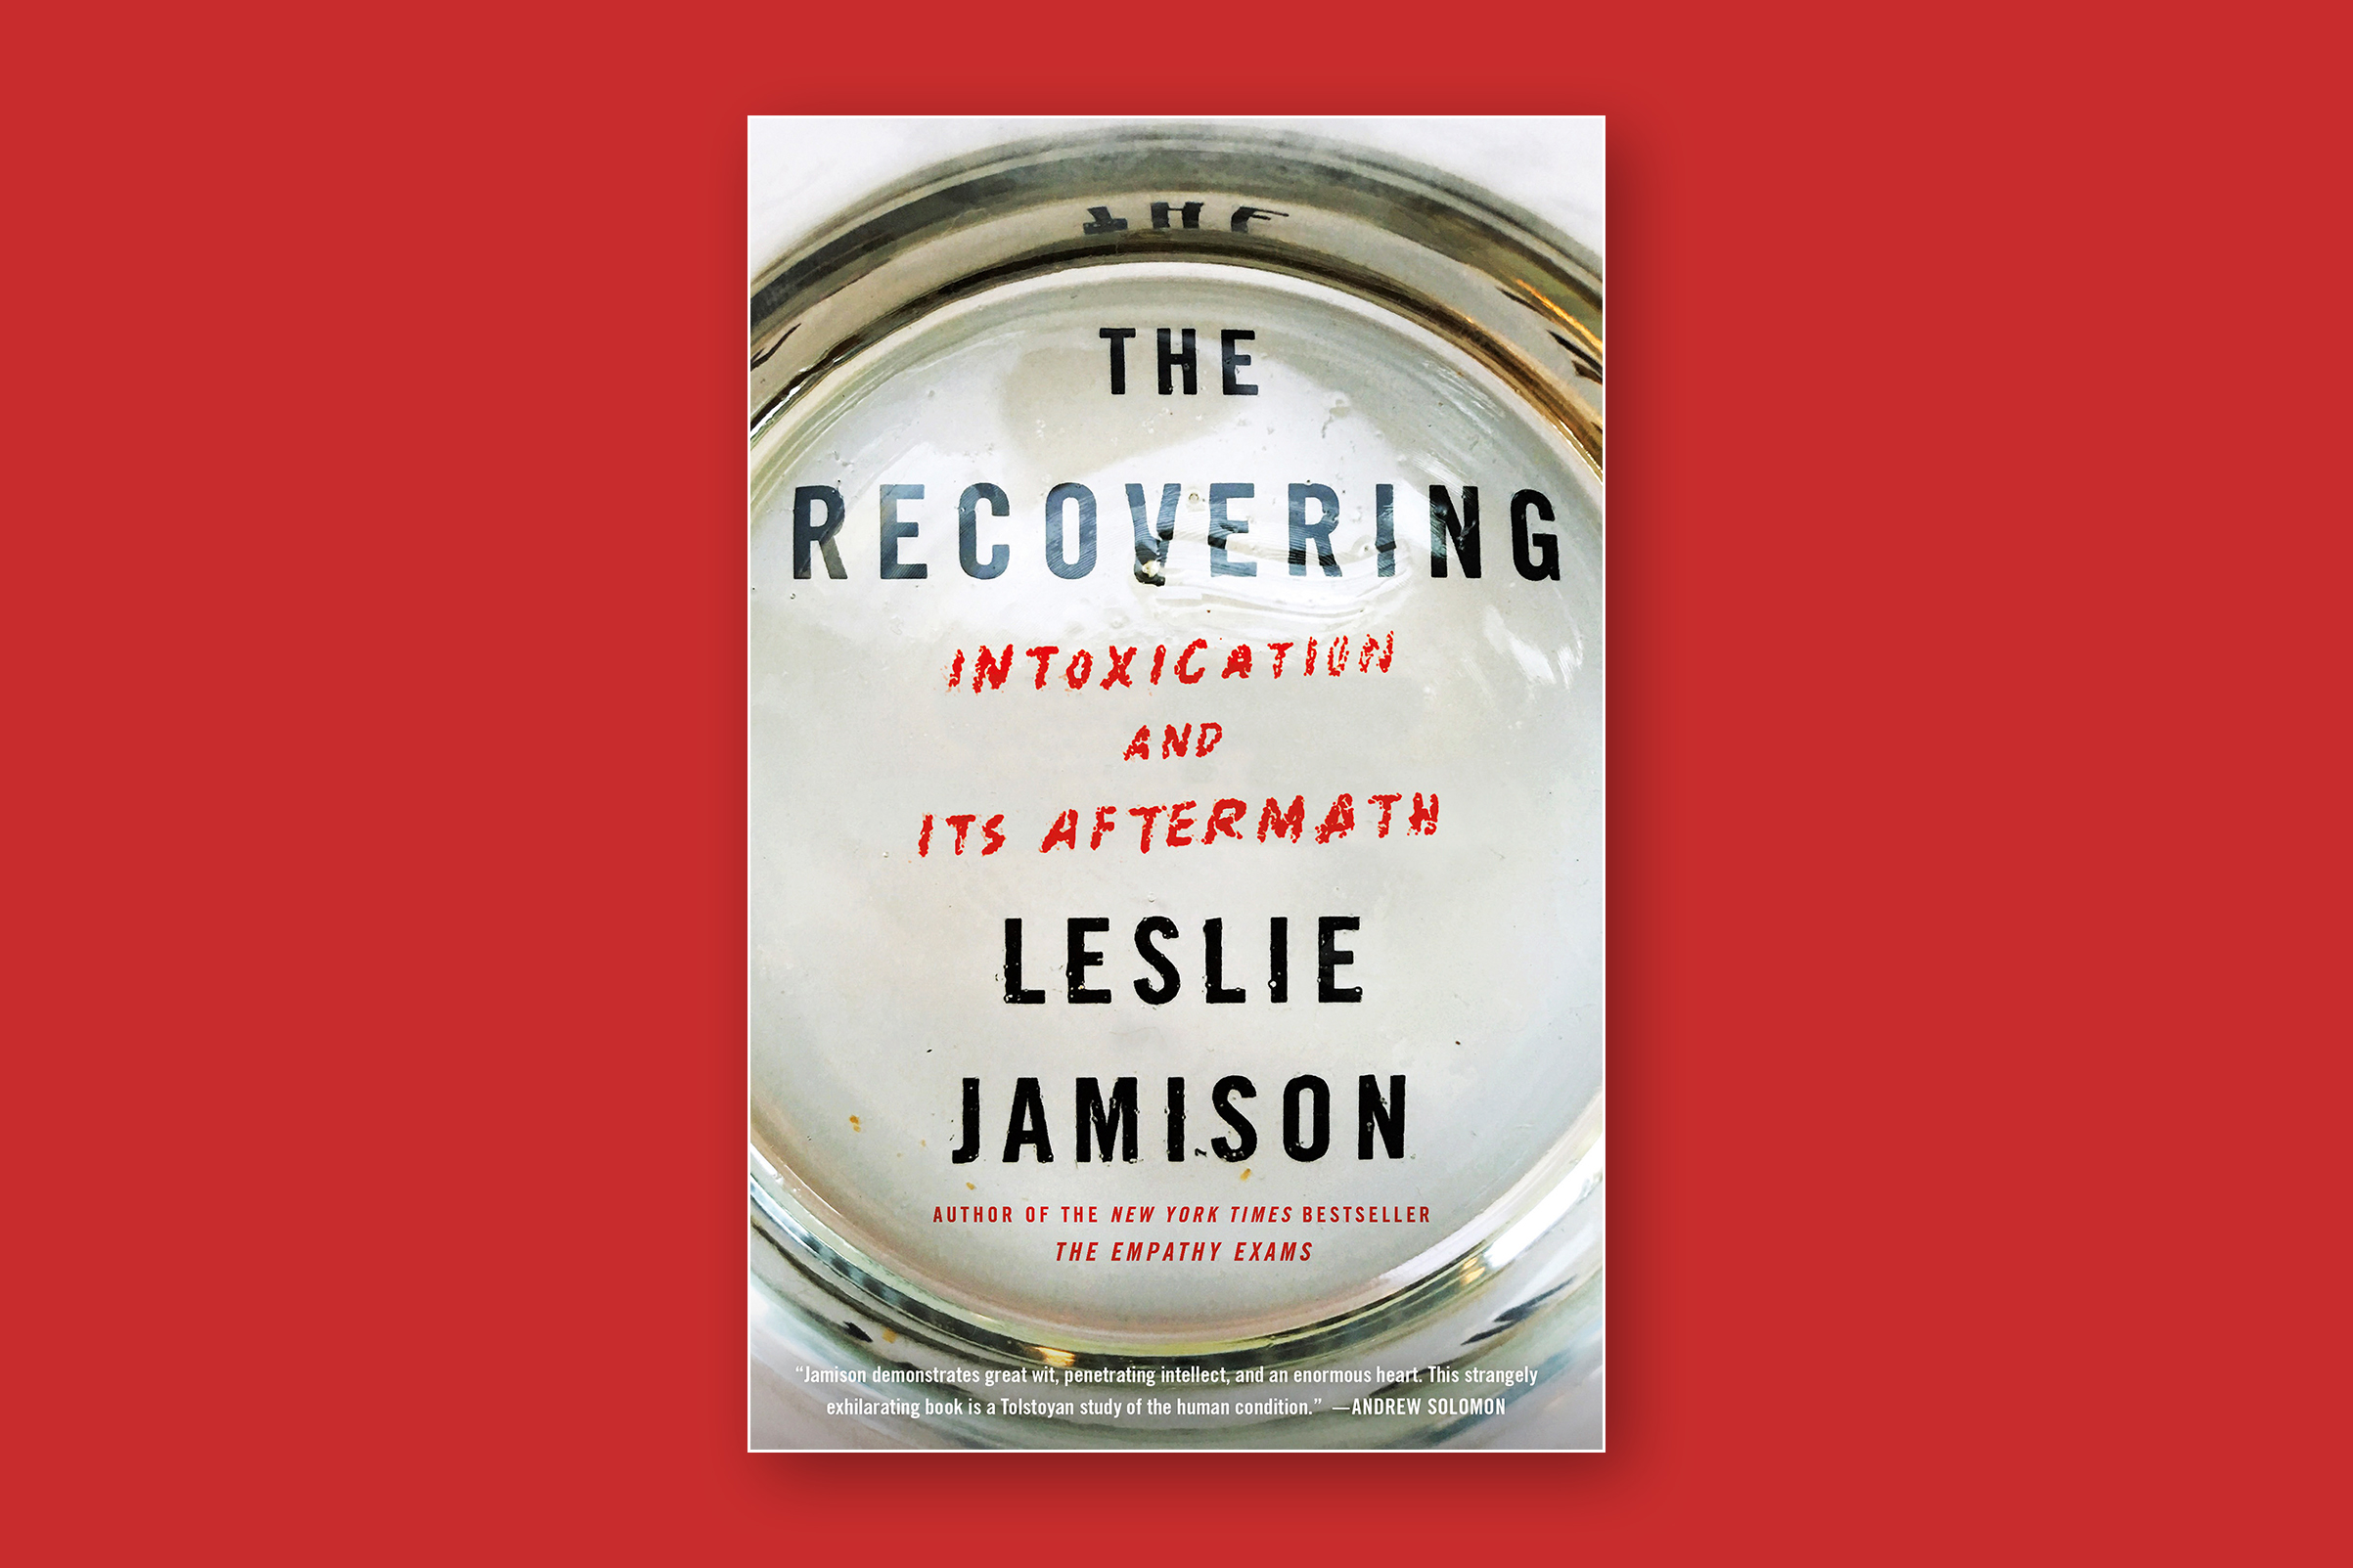 Leslie Jamison's The Recovering: Intoxication and It's Aftermath